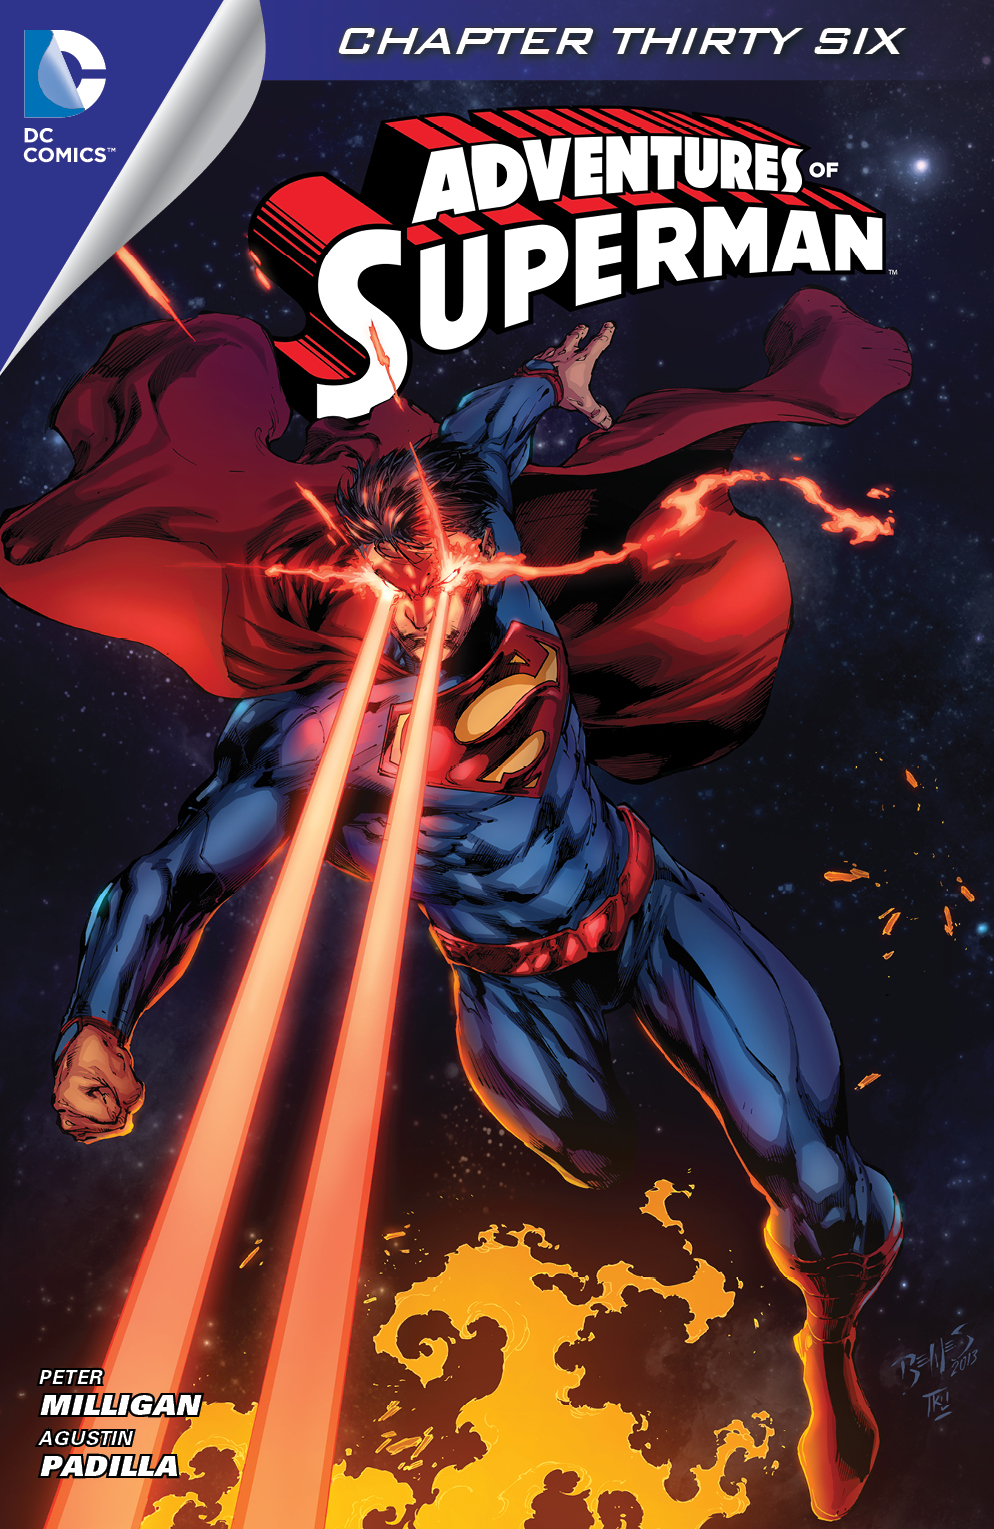 Adventures of Superman (2013-) #36 preview images